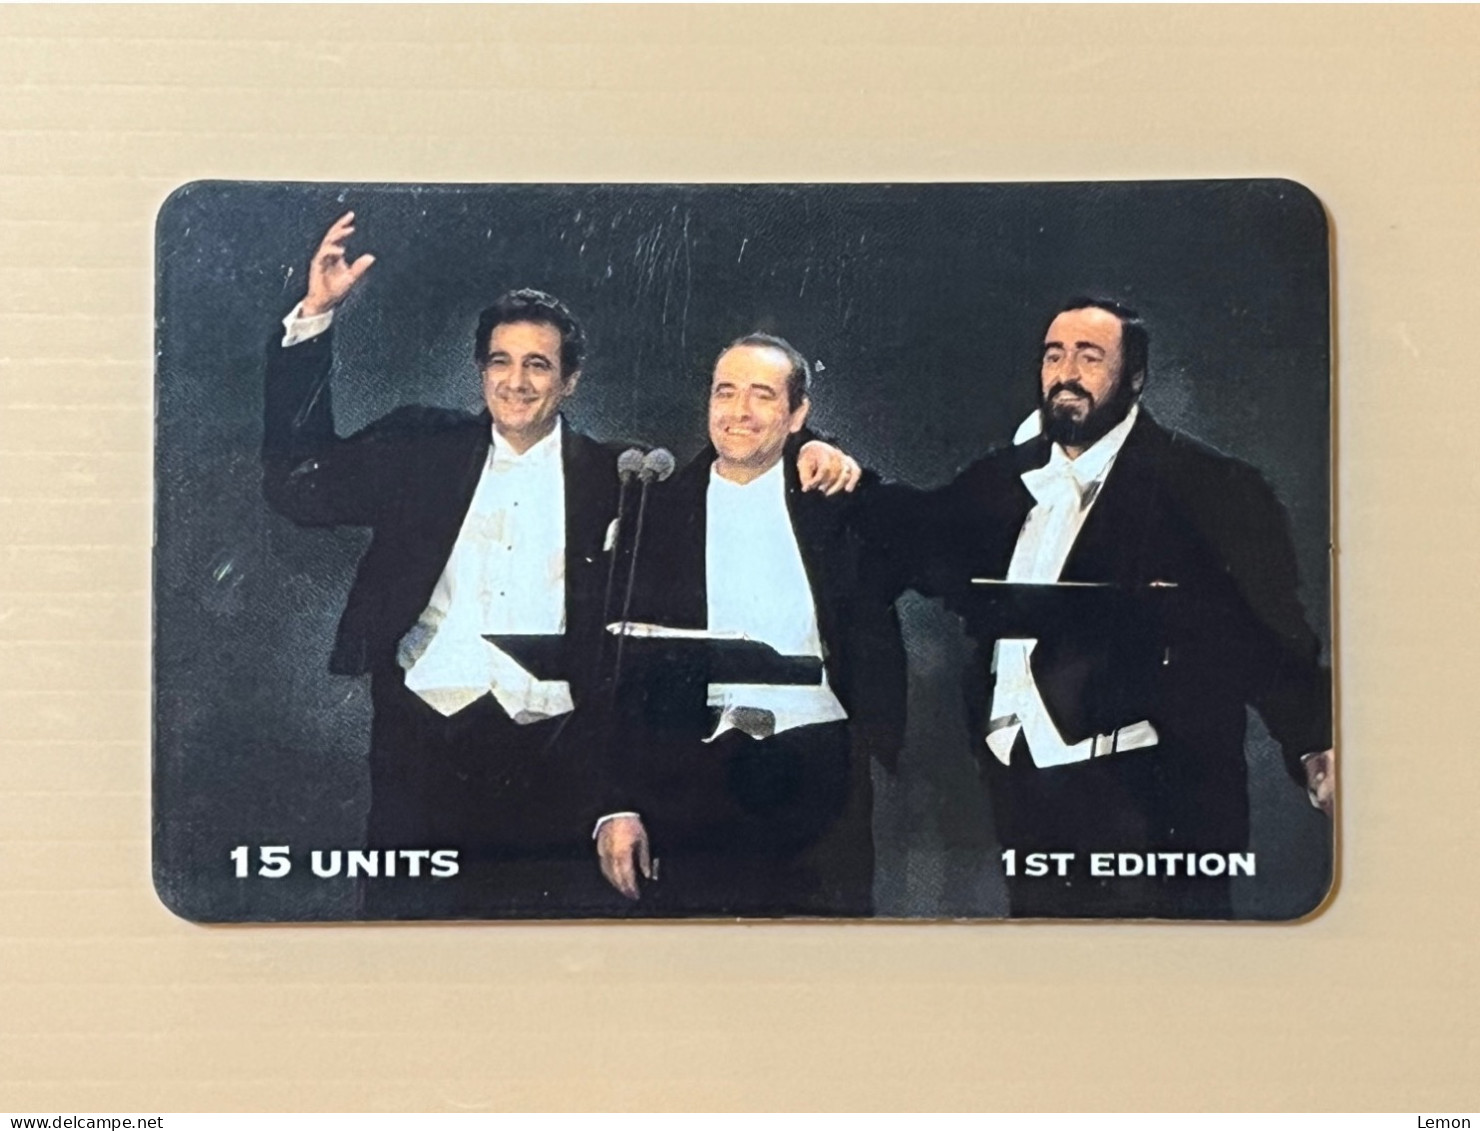 Mint USA UNITED STATES America Prepaid Telecard Phonecard, The 3 Tenors In Concert, Set Of 1 Mint Card - Collezioni